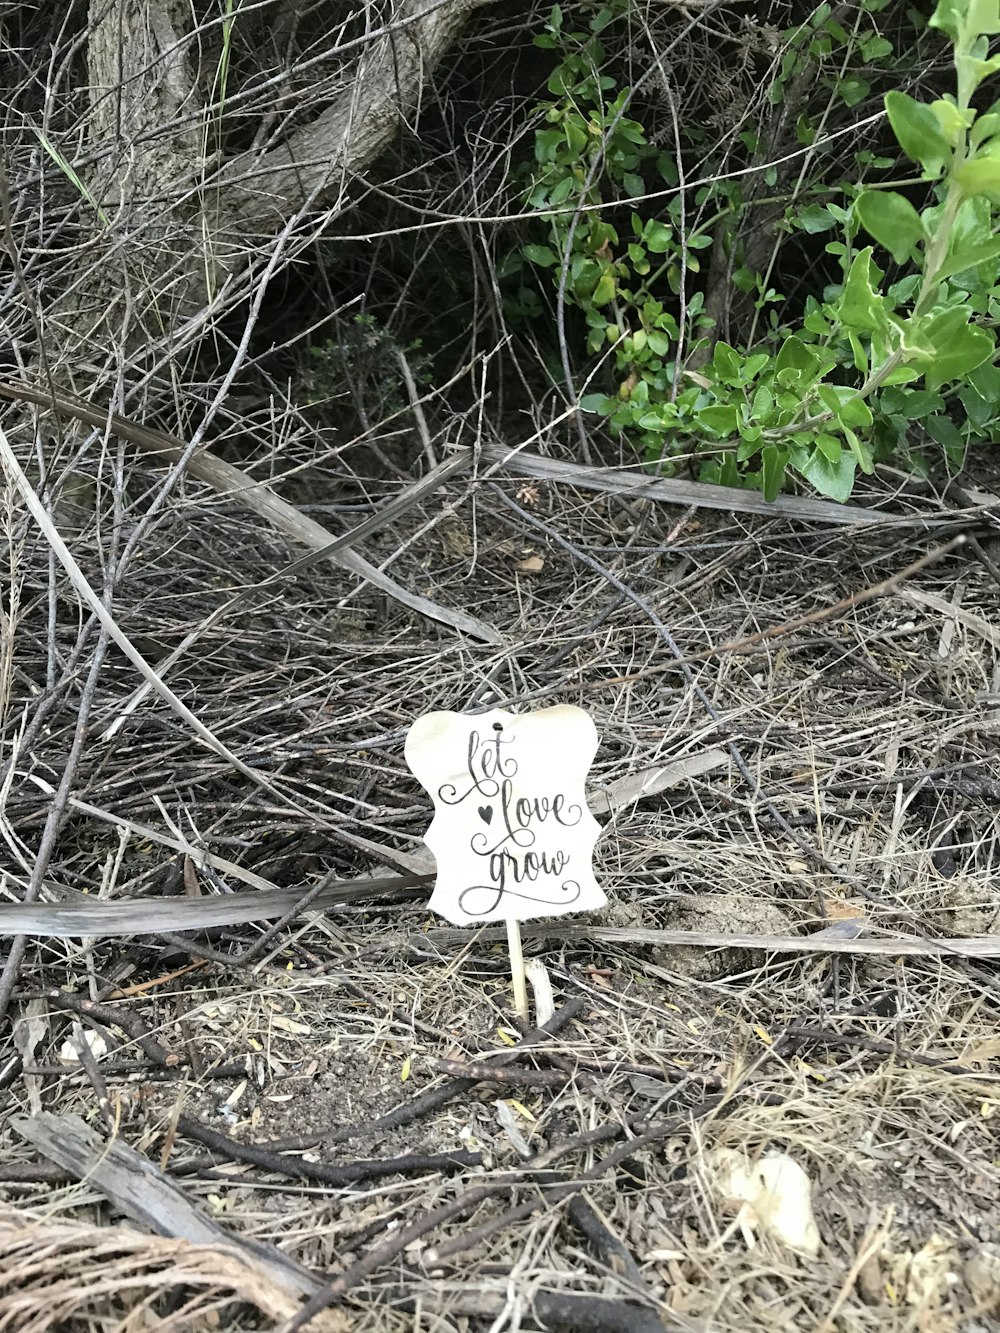 a sign that is sitting in the dirt